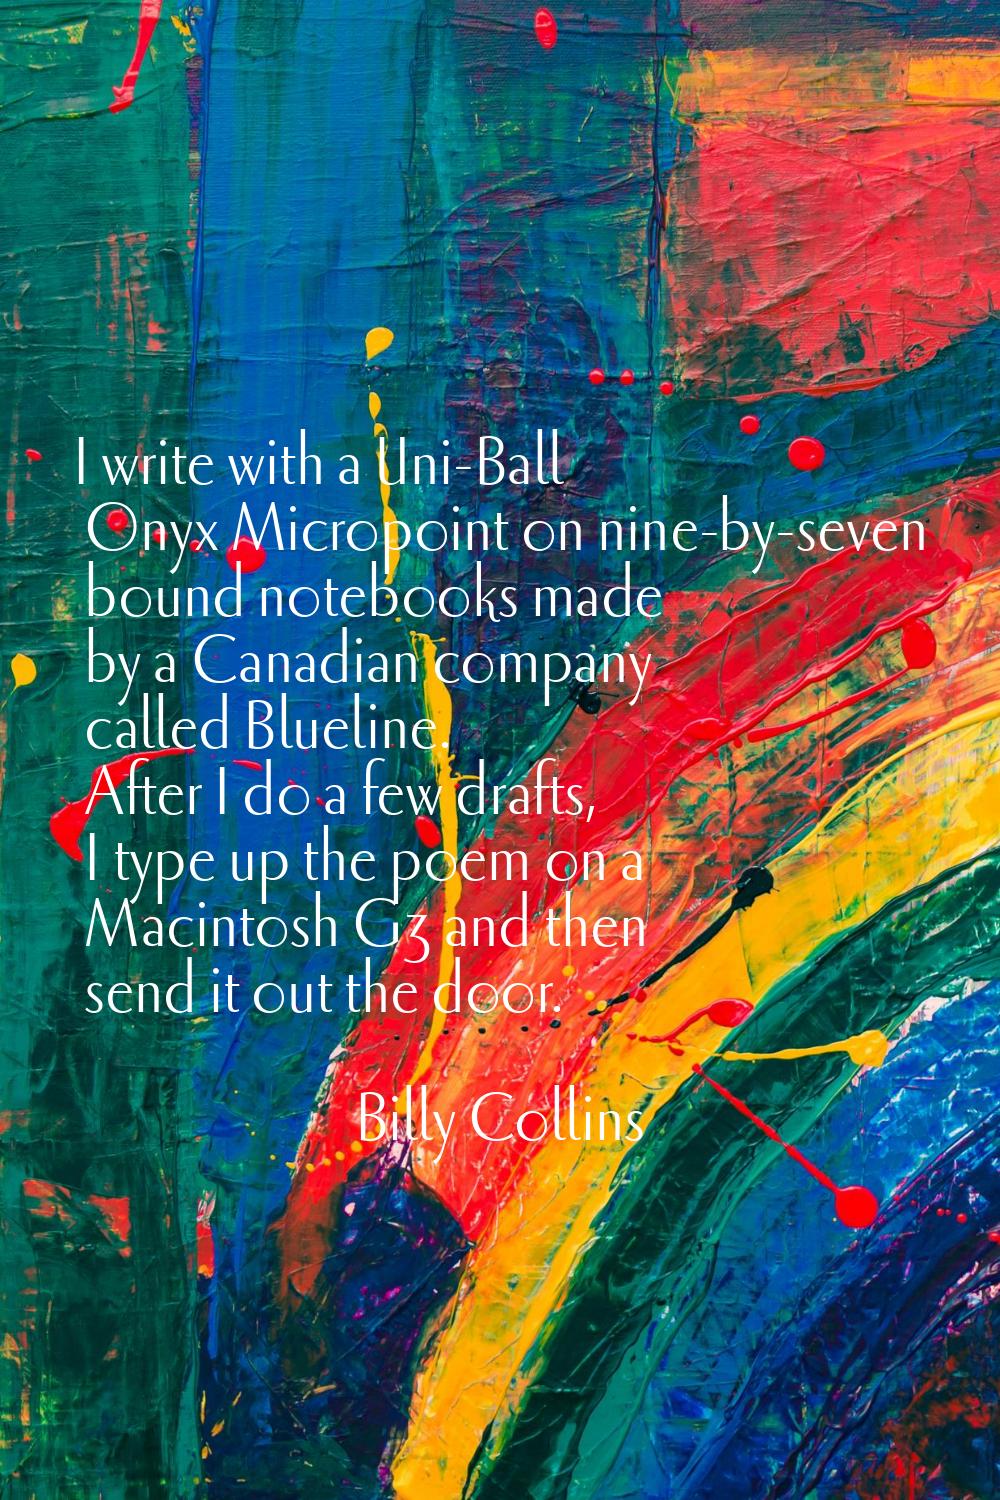 I write with a Uni-Ball Onyx Micropoint on nine-by-seven bound notebooks made by a Canadian company